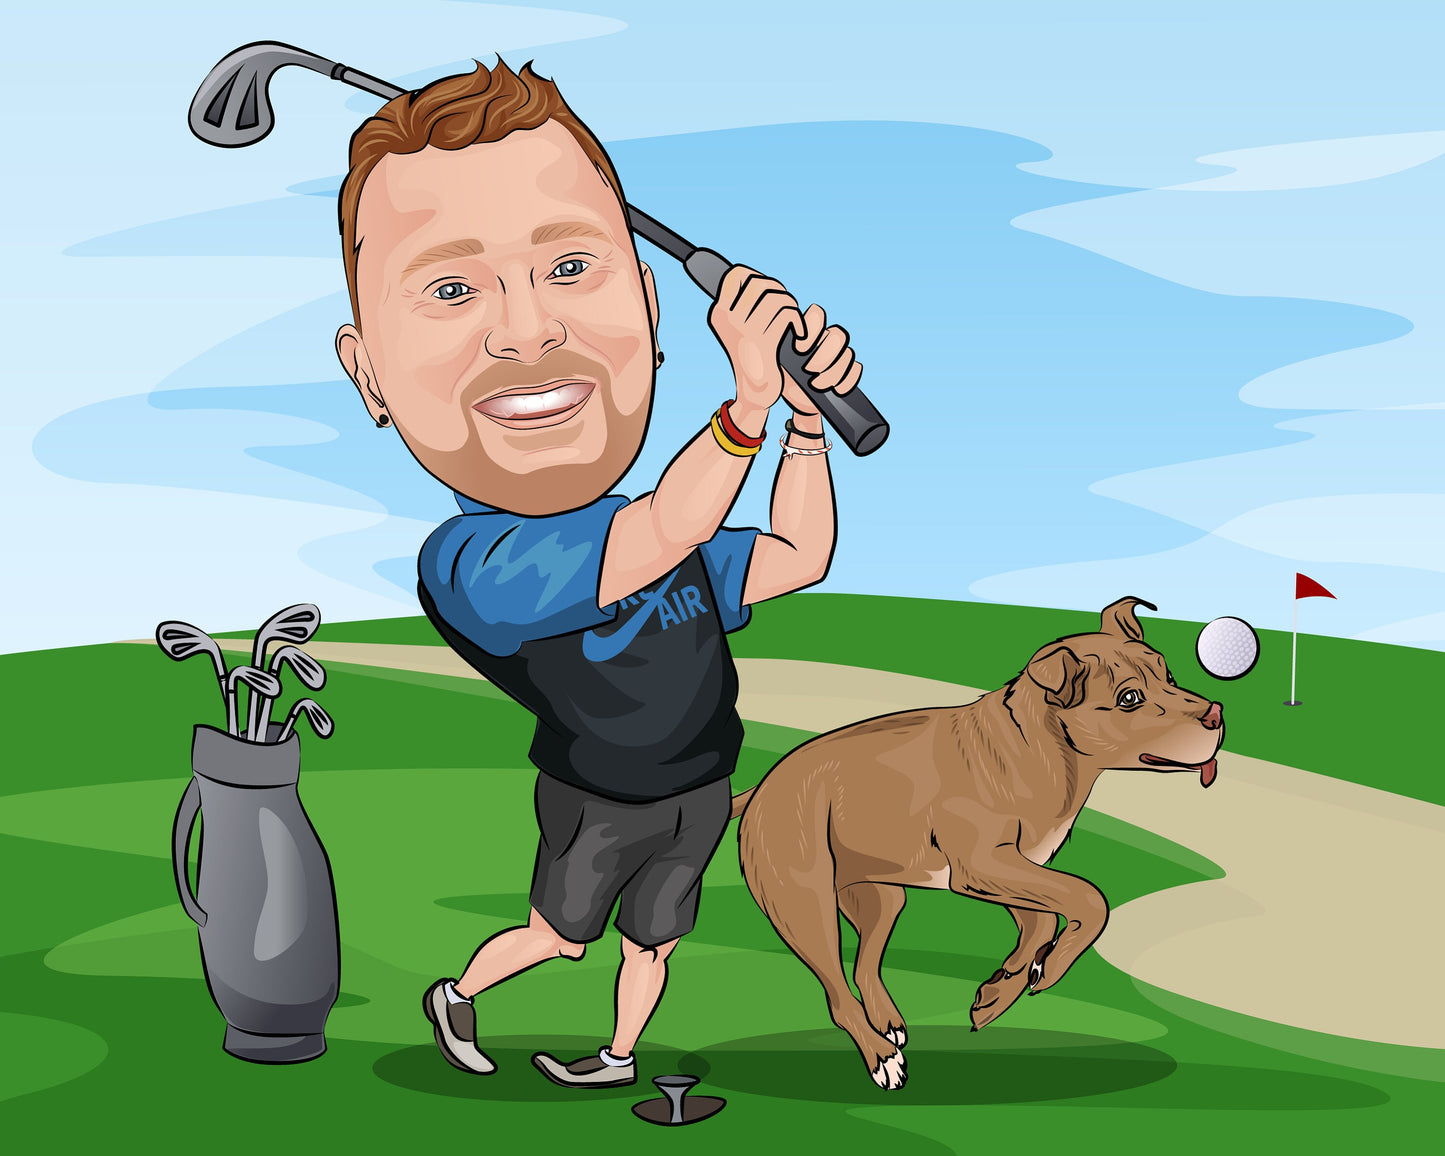 Golfer Gift - Custom Caricature Portrait From Your Photo/Golf Player Gift/Golf Cartoon